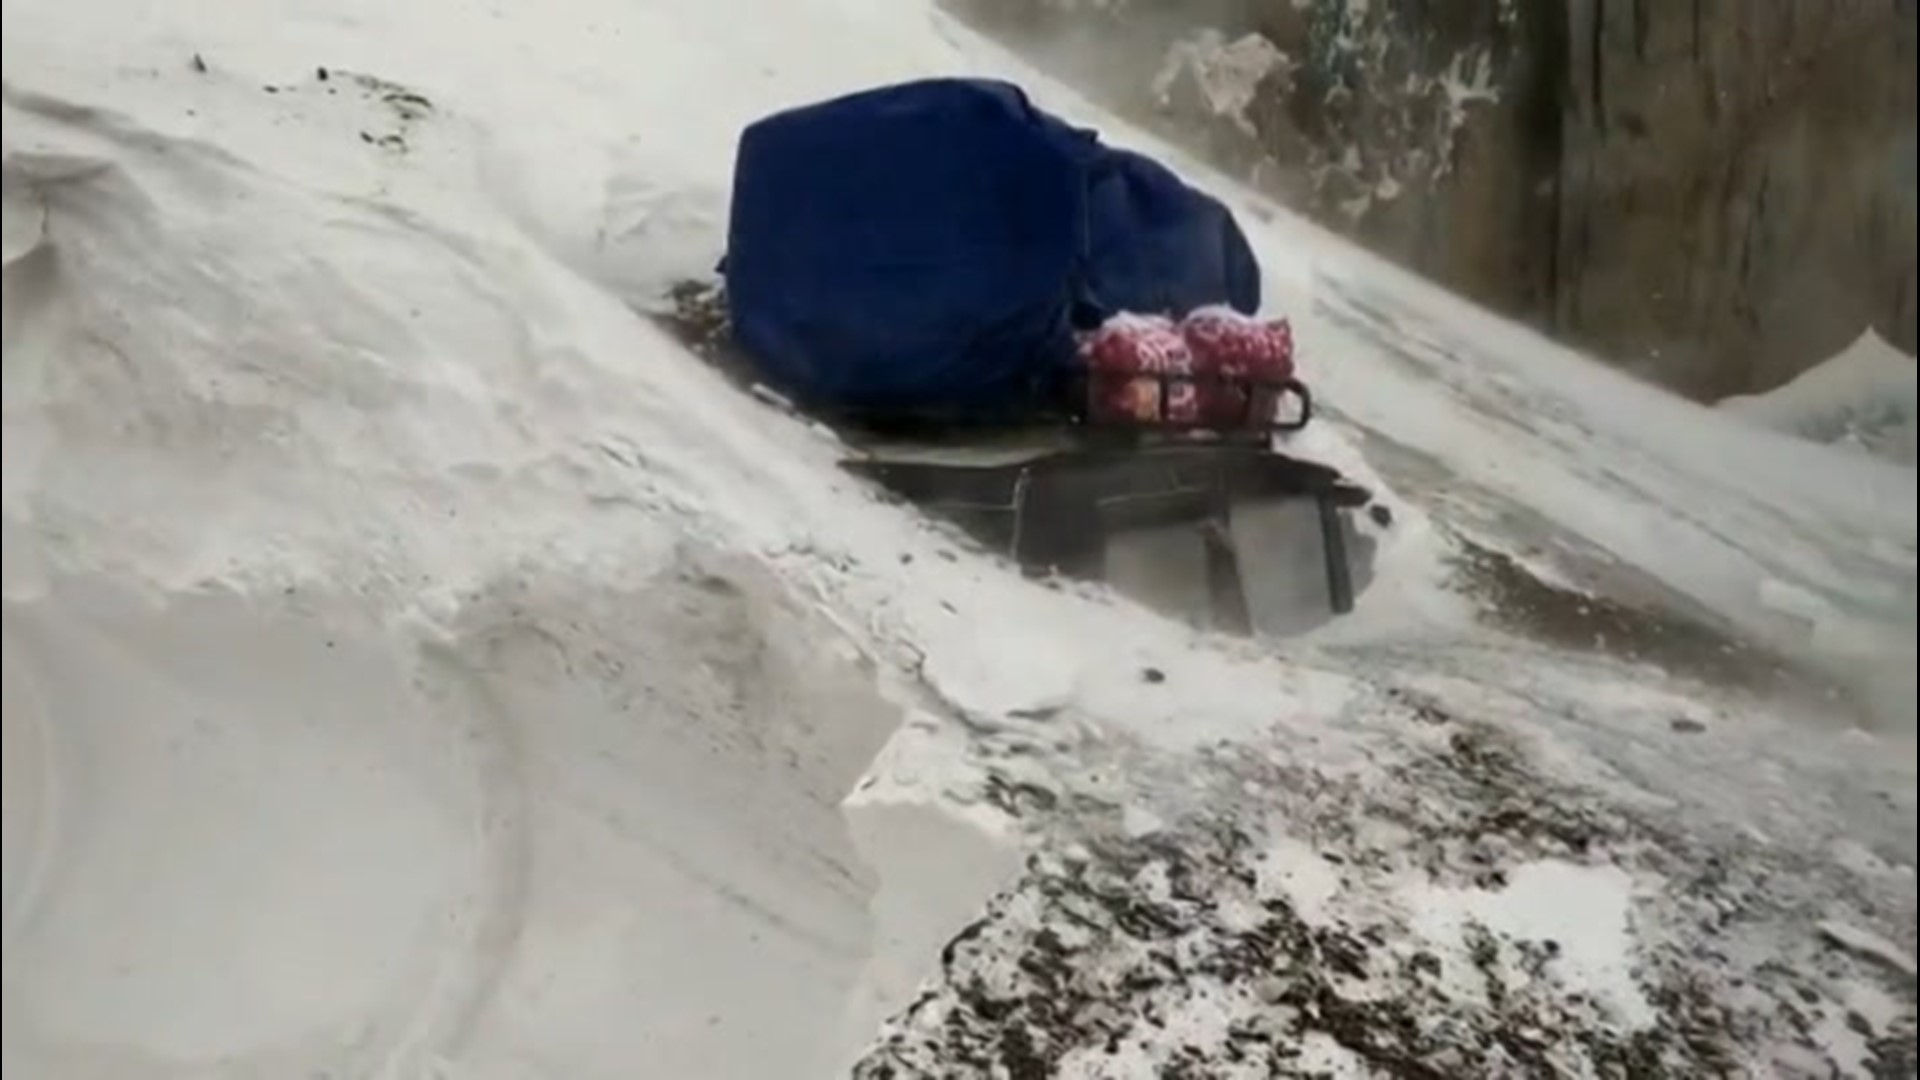 Police in Kashmir raced to save five people trapped in a vehicle after an avalanche swept downhill and onto a mountain pass, burying the vehicle on Nov. 29.